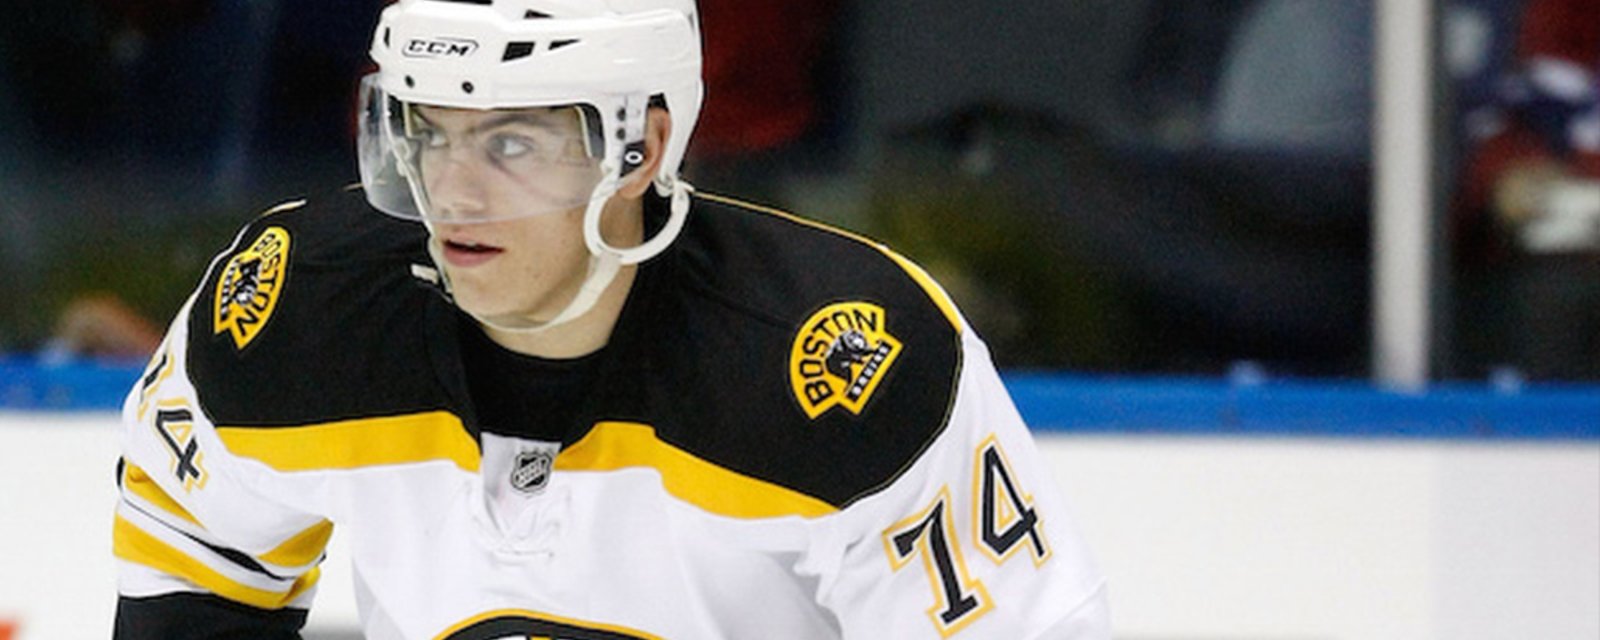 Former Bruins top prospect forced to retire at just age 28 after devastating concussions